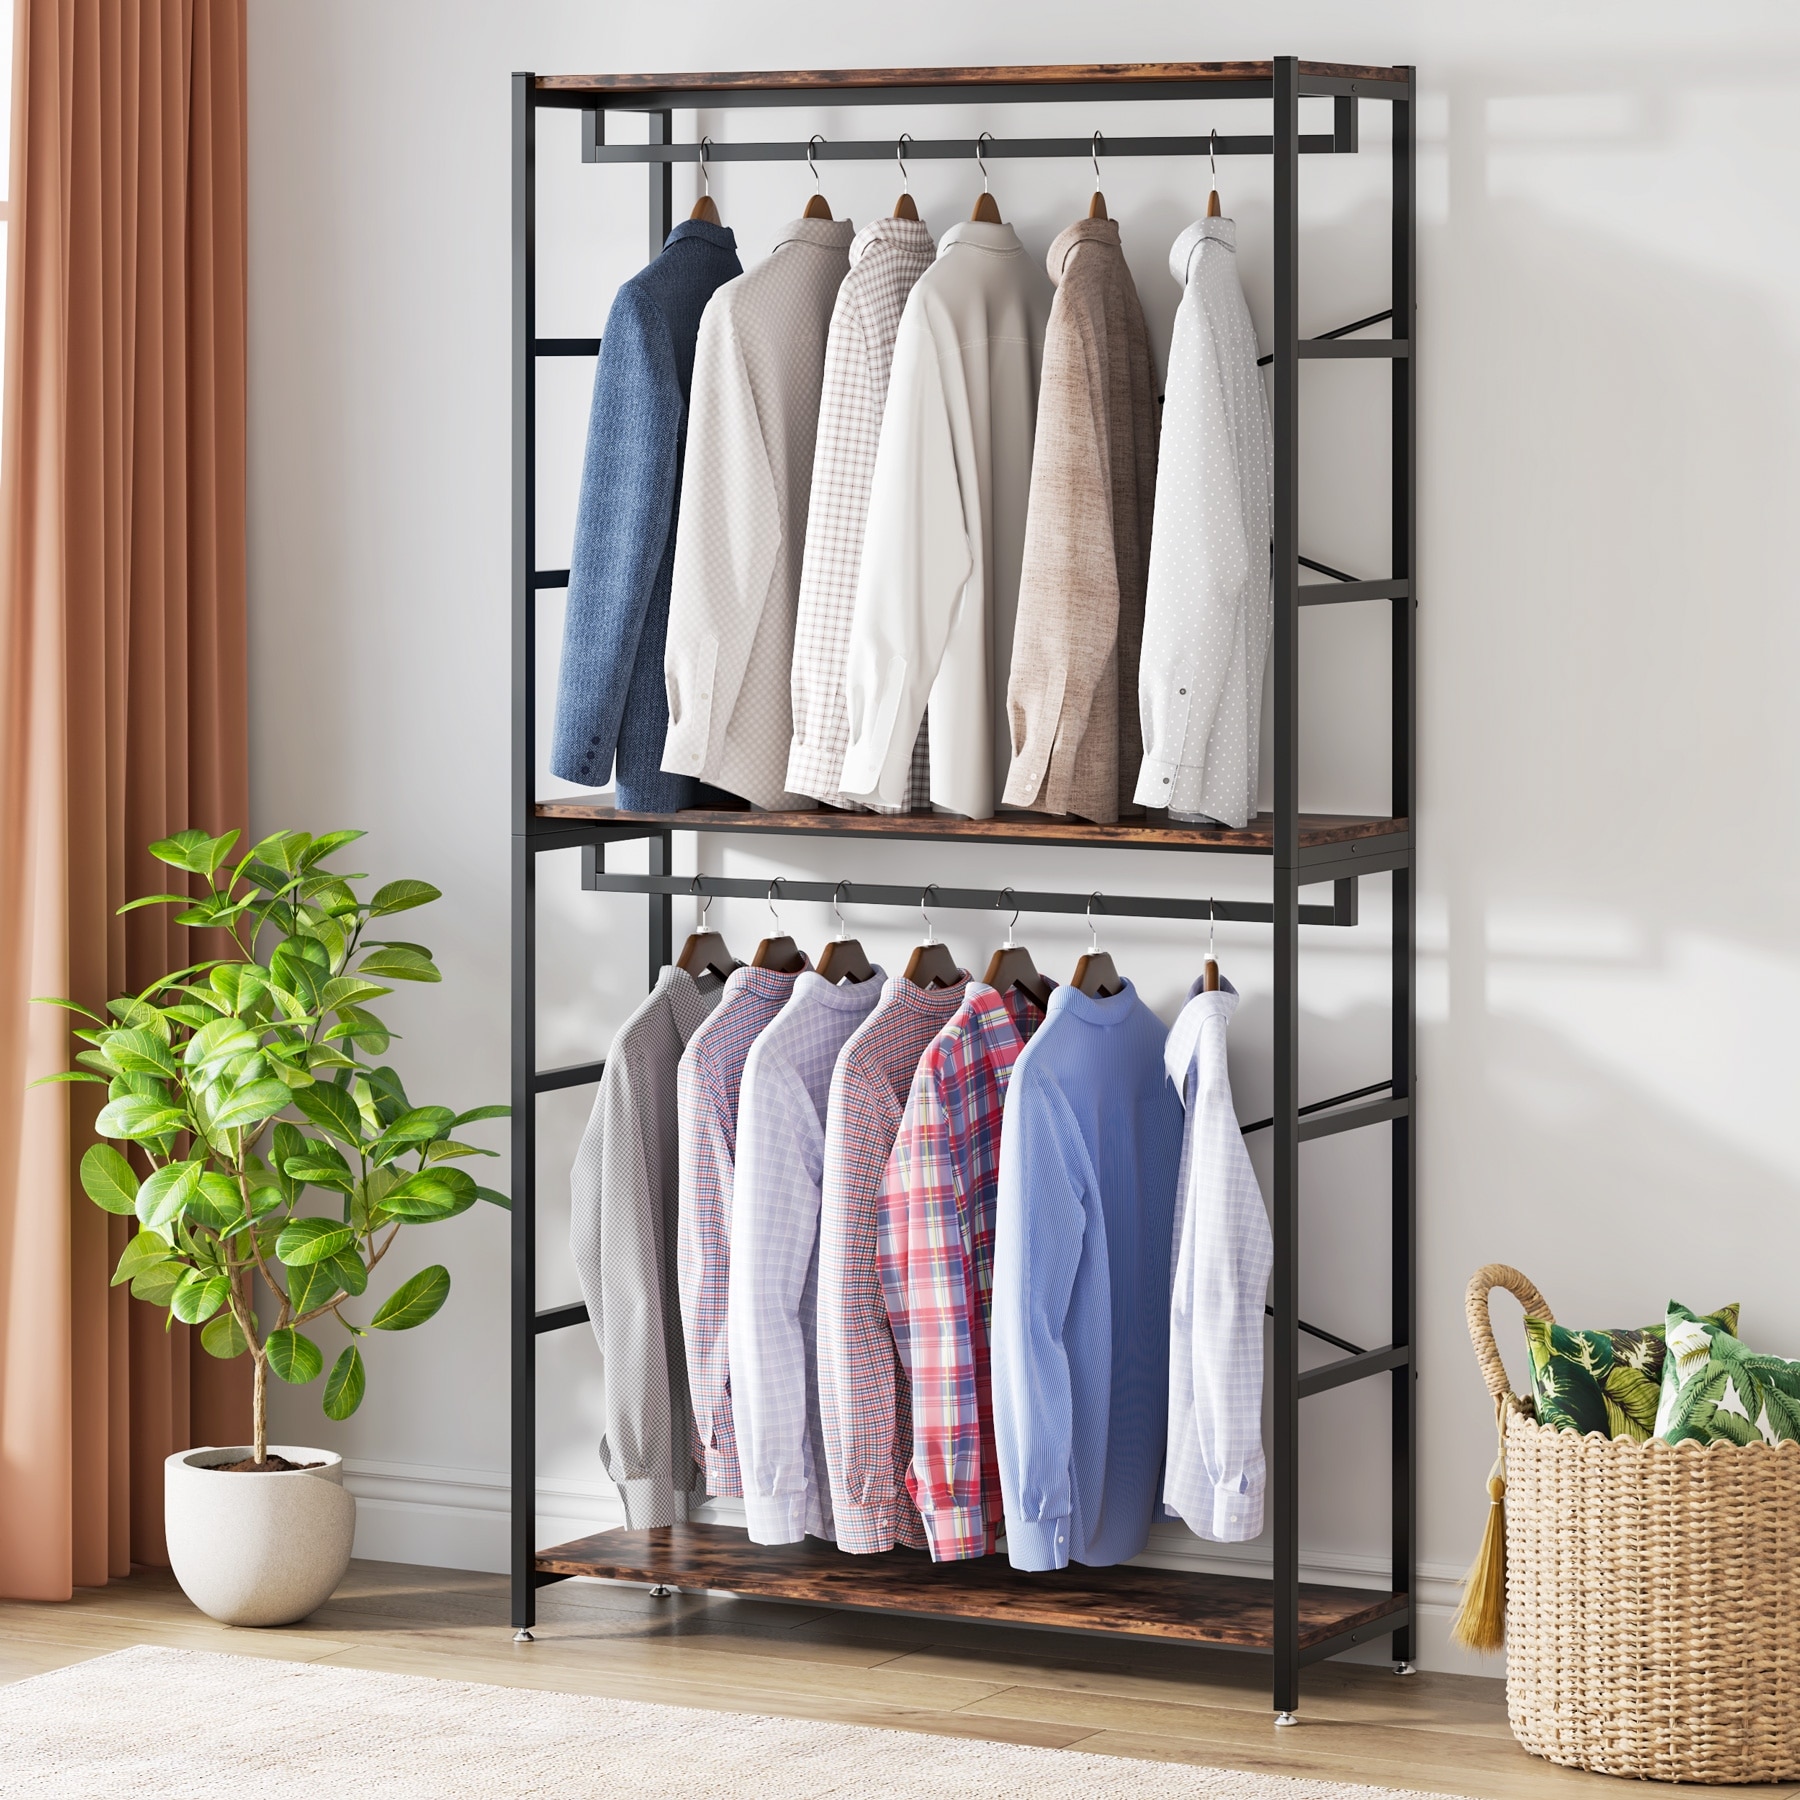 Tribesigns Black Steel Freestanding Clothing Rack, Heavy Duty & Sturdy, 500 lbs Load Capacity, Easy Assembly